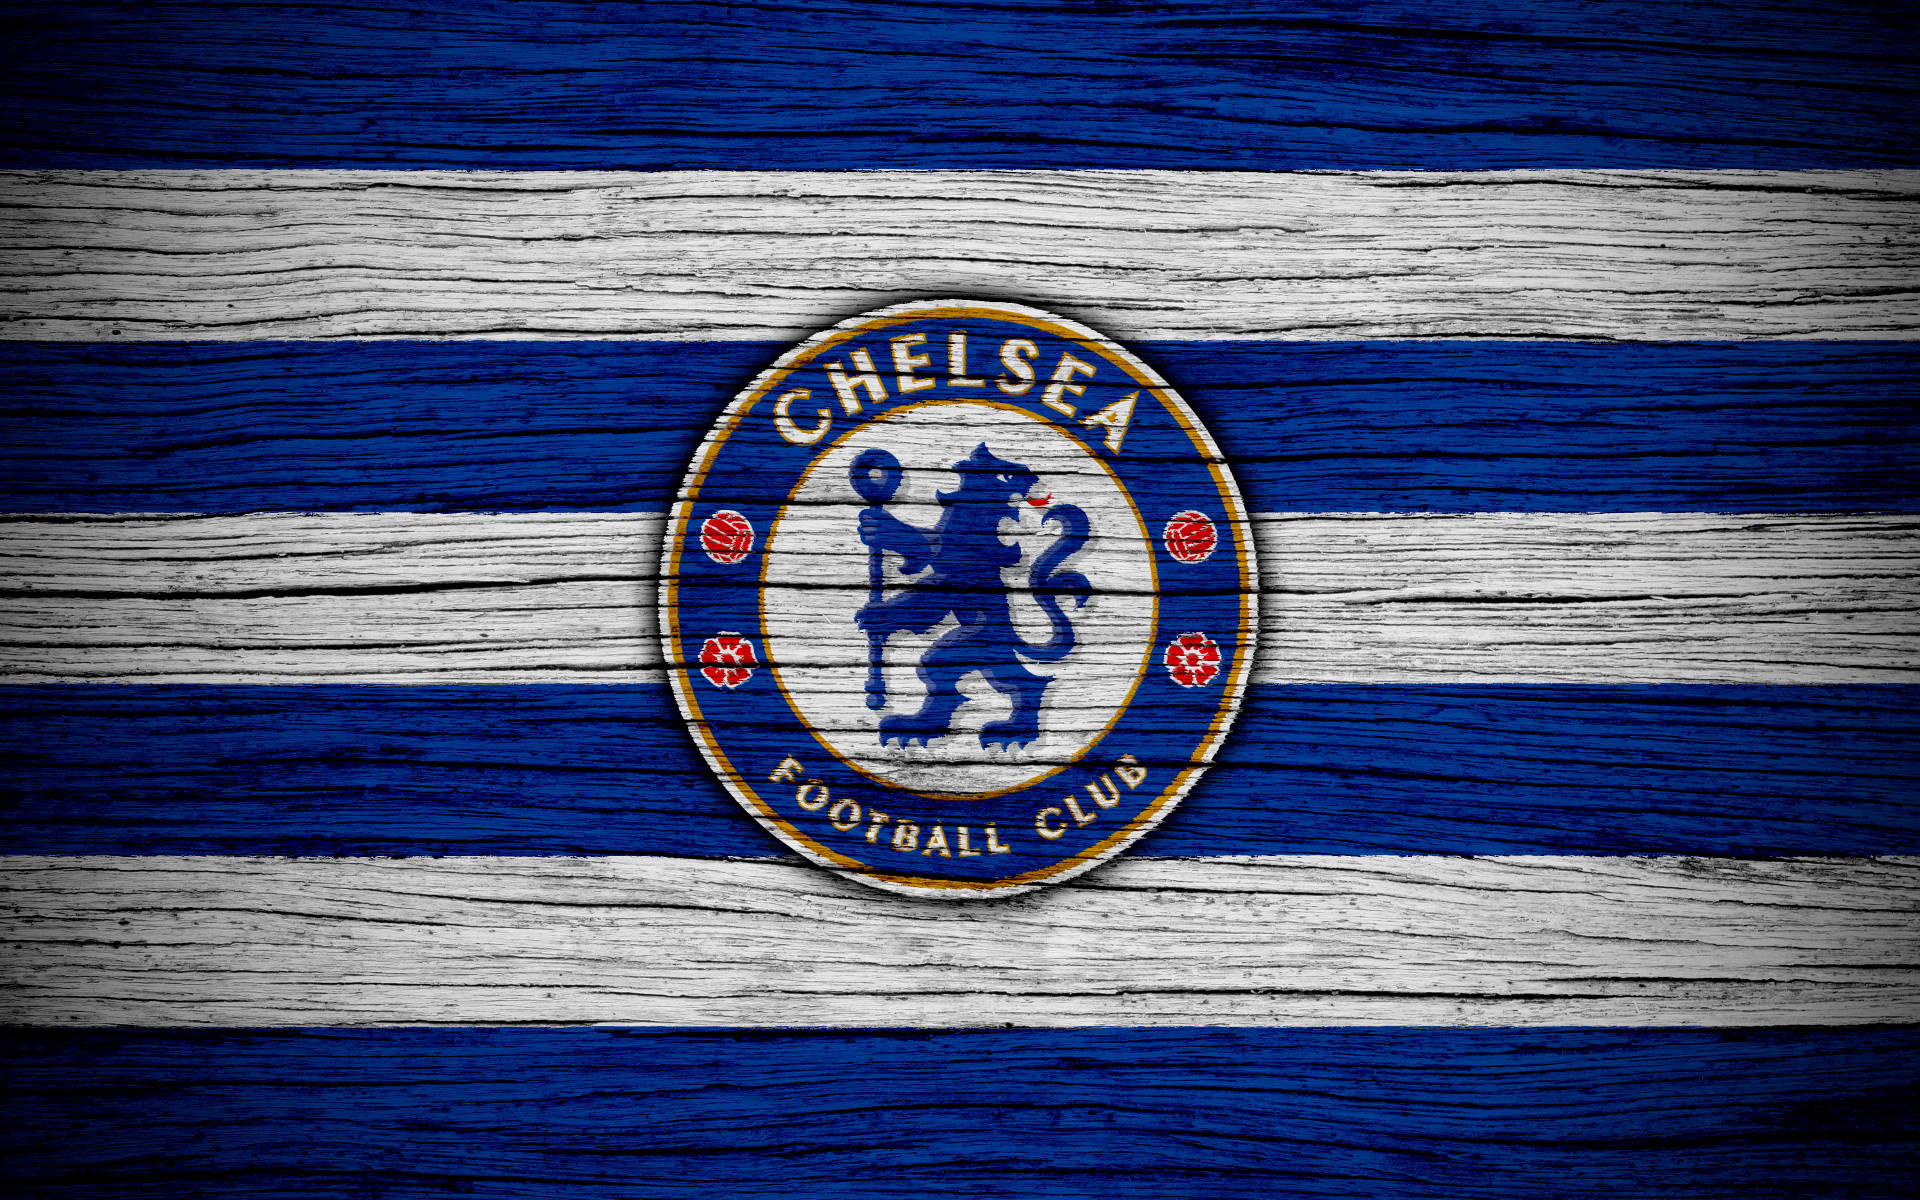 Chelsea Fc In Blue And White Background